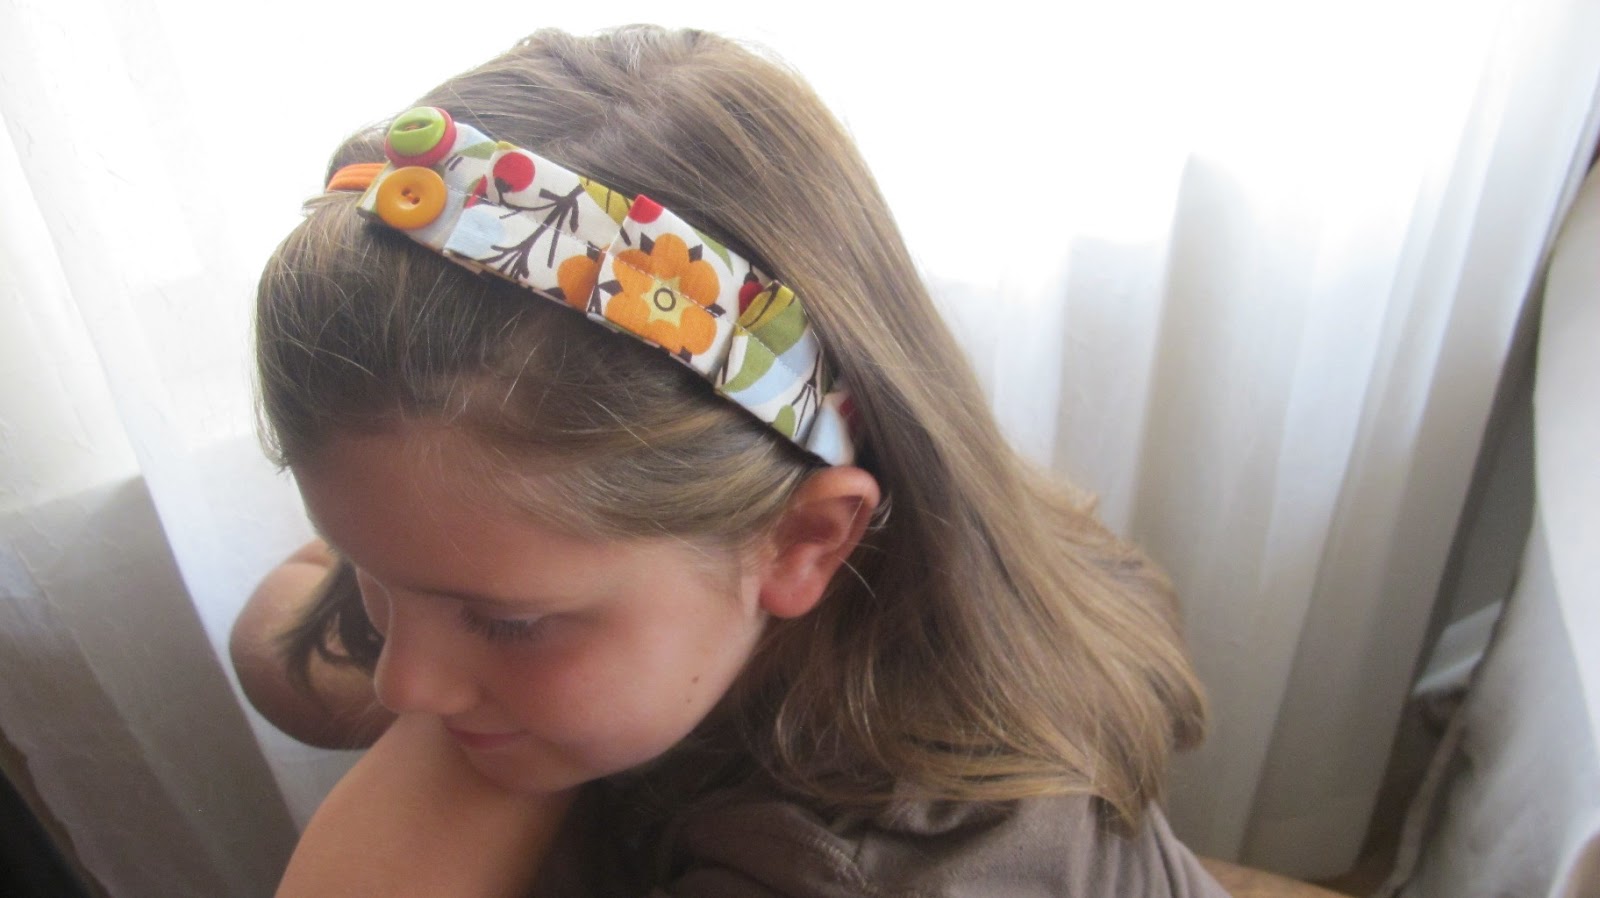 Its Tommy's Time: Orange, green, and brown headband (size child-adult)